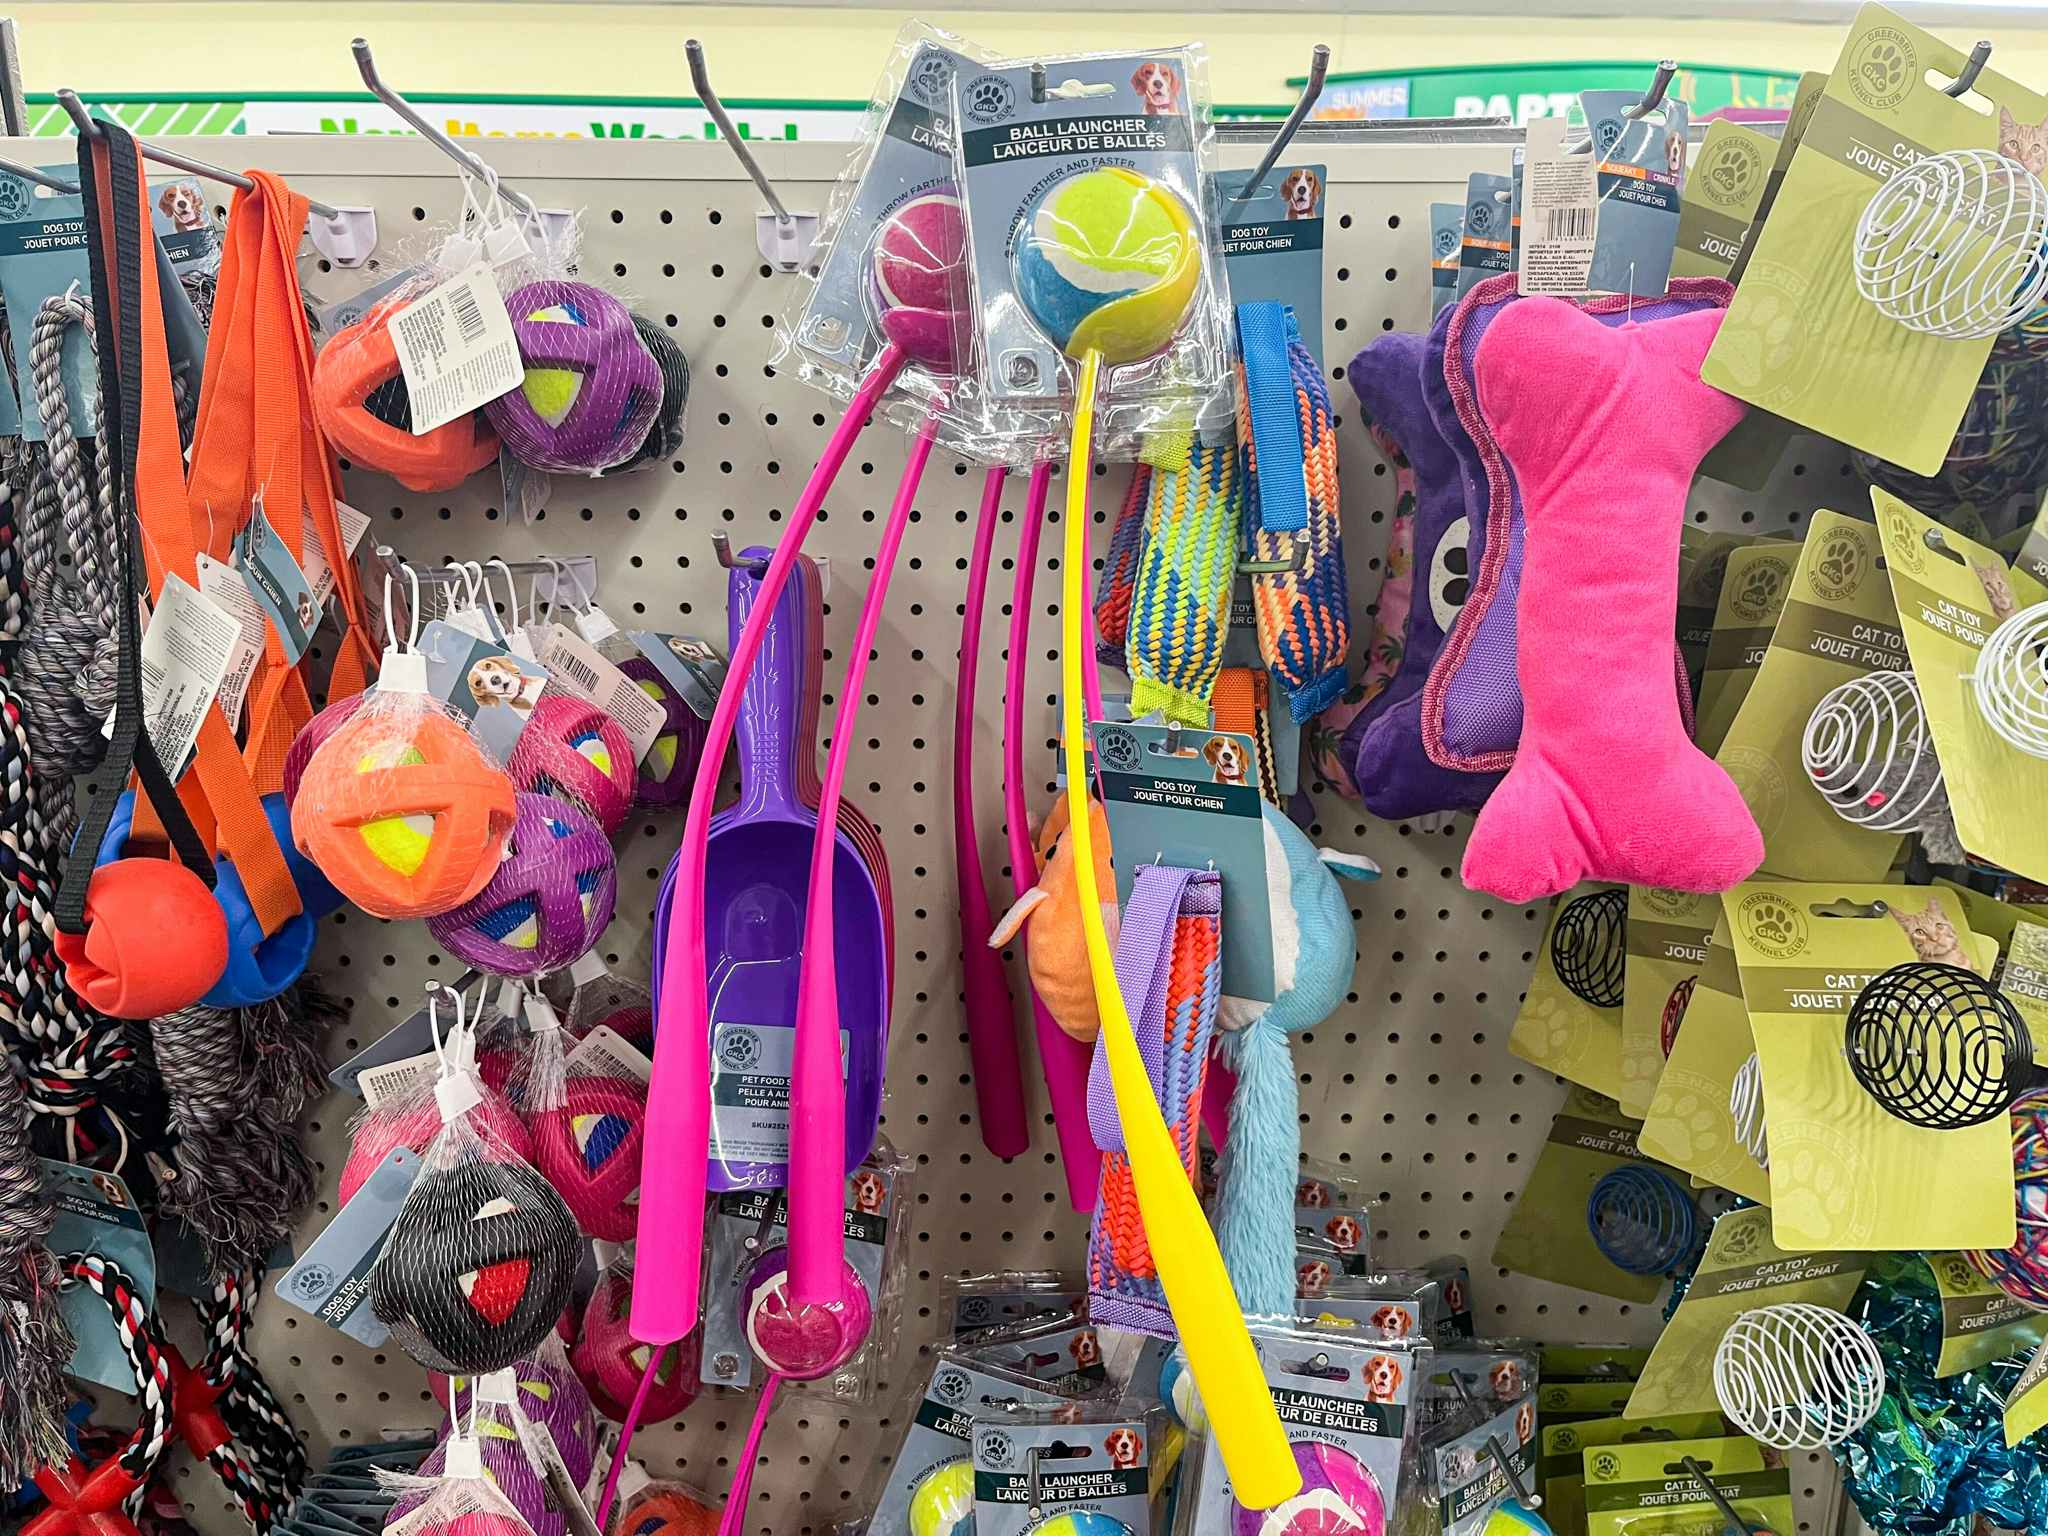 Greenbrier Kennel Club Ball Launcher With Ball dog toy at Dollar Tree